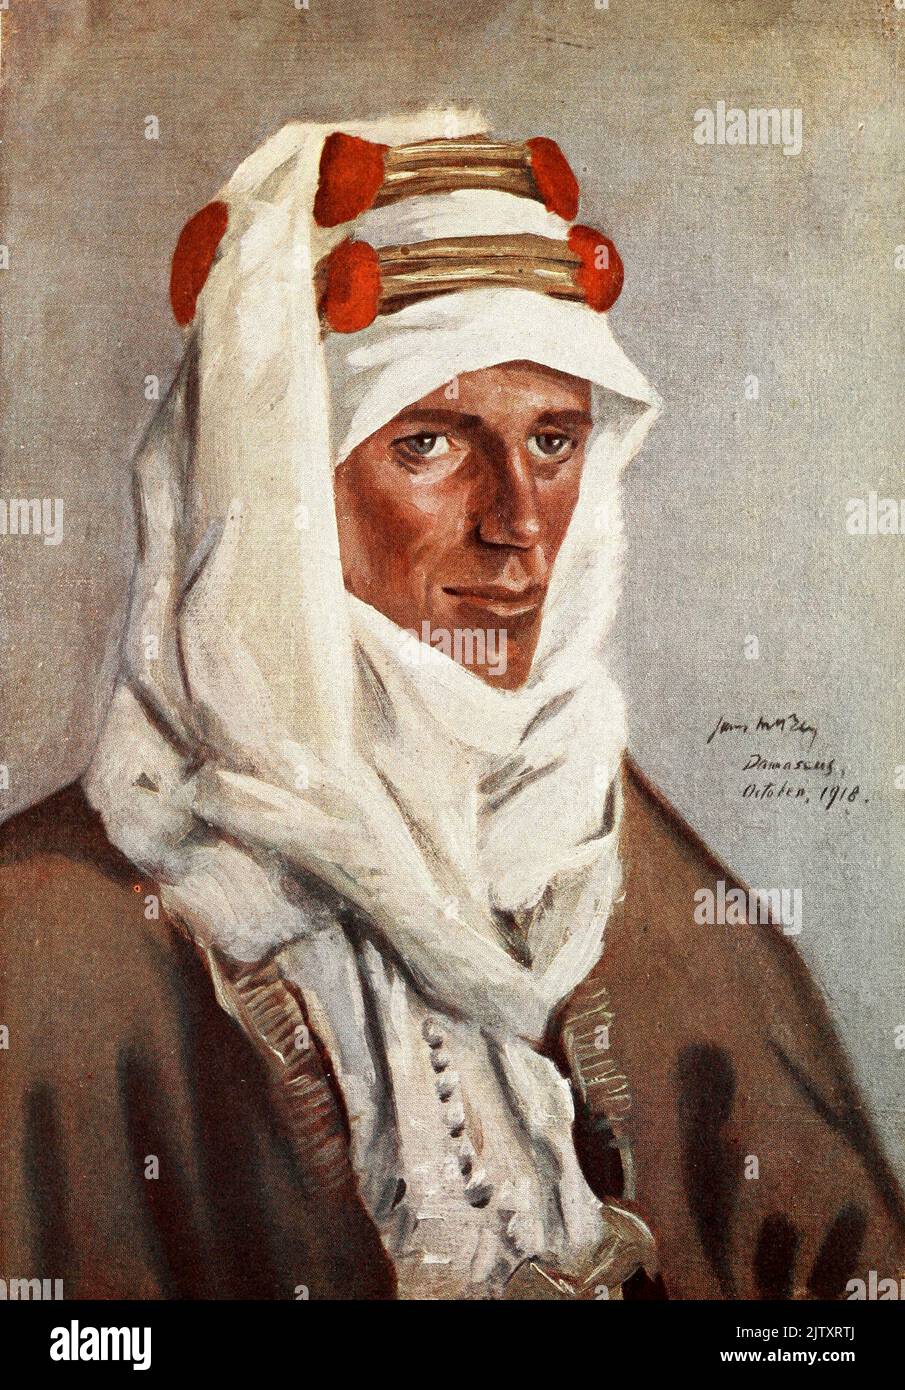 Colonel Thomas Edward Lawrence CB DSO (16 August 1888 – 19 May 1935) was a British archaeologist, army officer, diplomat, and writer, who became renowned for his role in the Arab Revolt (1916–1918) and the Sinai and Palestine Campaign (1915–1918) against the Ottoman Empire during the First World War. The breadth and variety of his activities and associations, and his ability to describe them vividly in writing, earned him international fame as Lawrence of Arabia, a title used for the 1962 film based on his wartime activities. from the book ' NILE TO ALEPPO ' BY HECTOR DINNING CAPTAIN. AUSTRALI Stock Photo